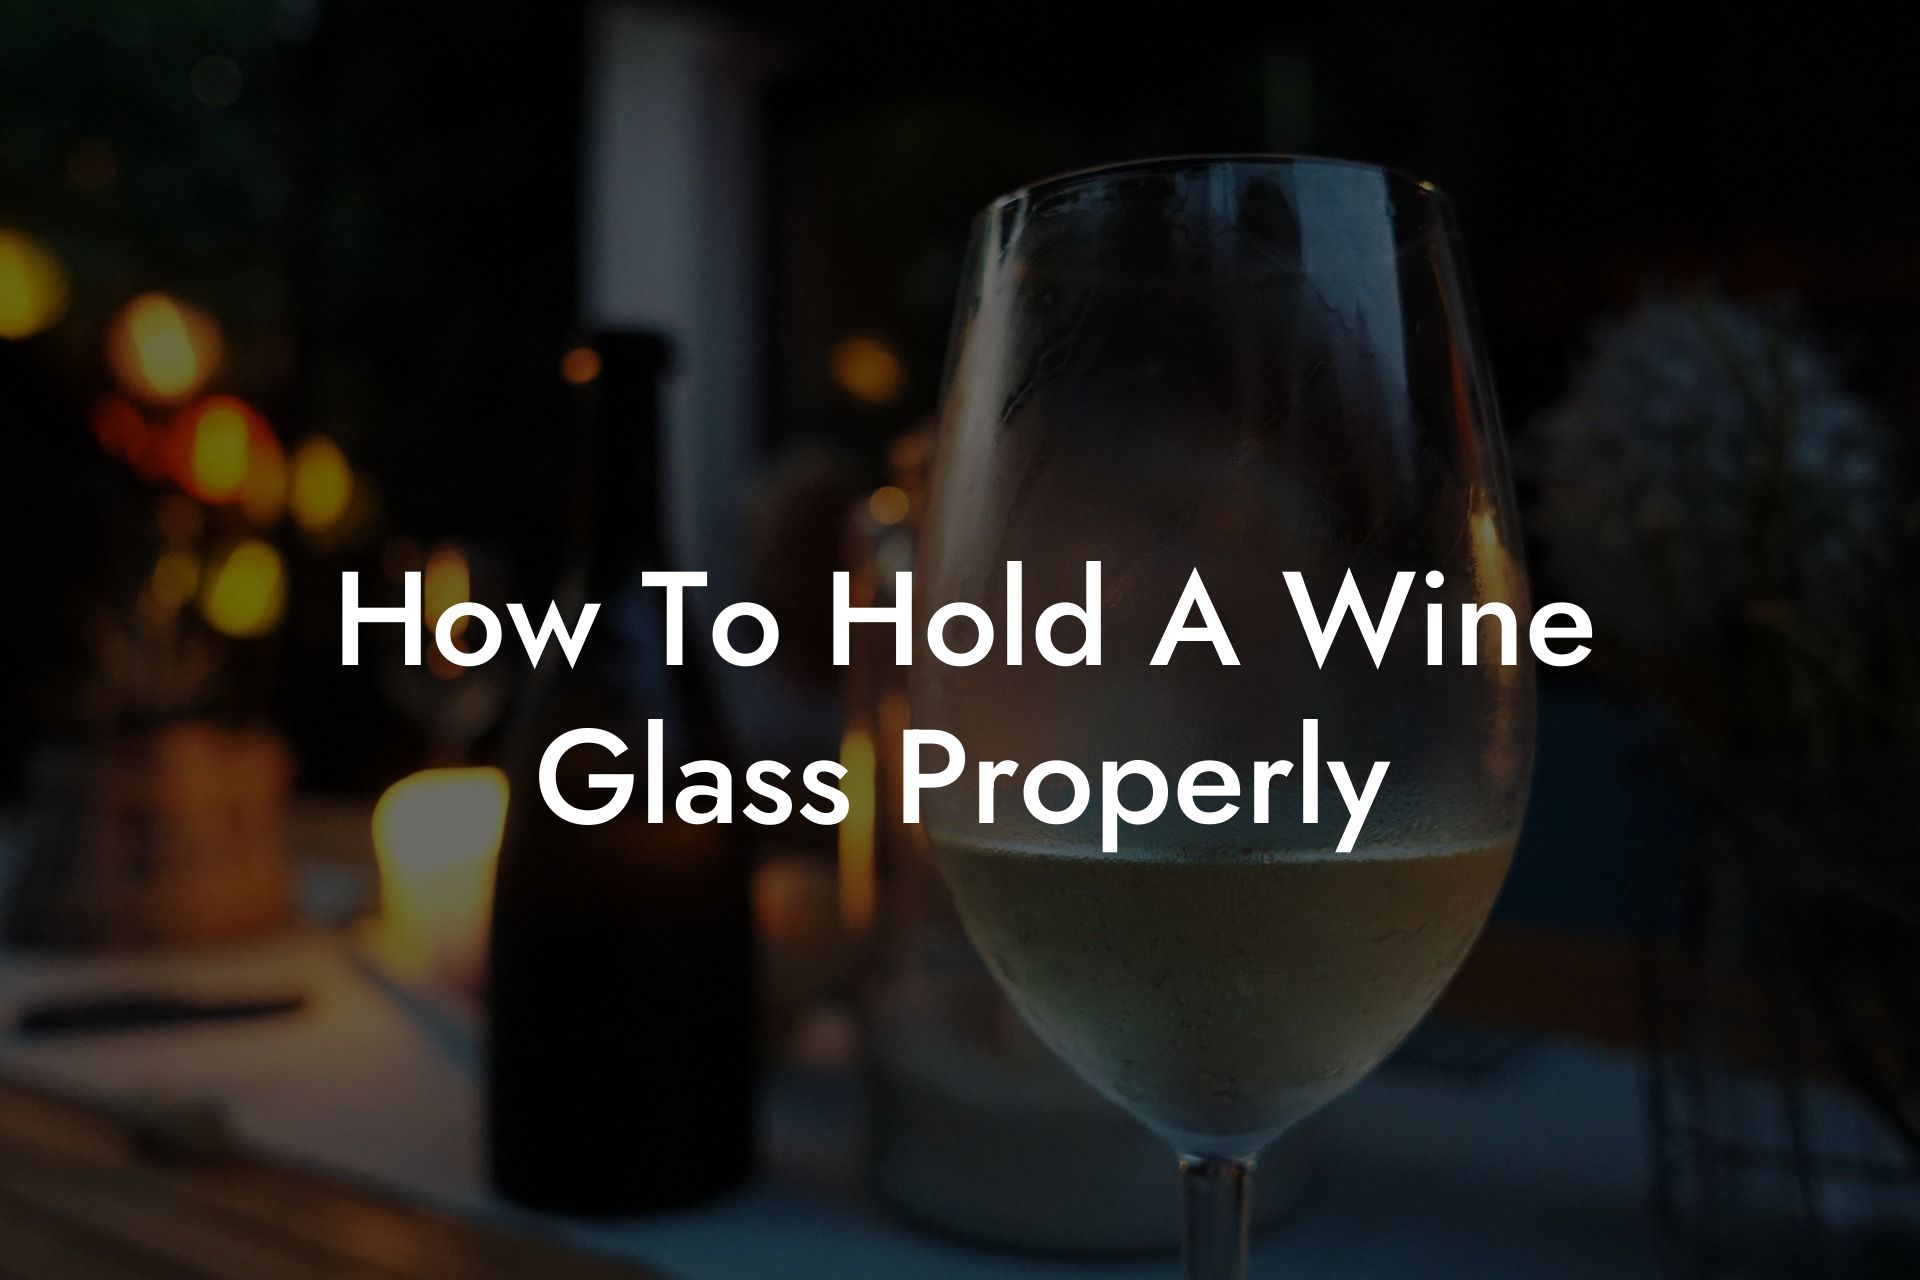 How To Hold A Wine Glass Properly